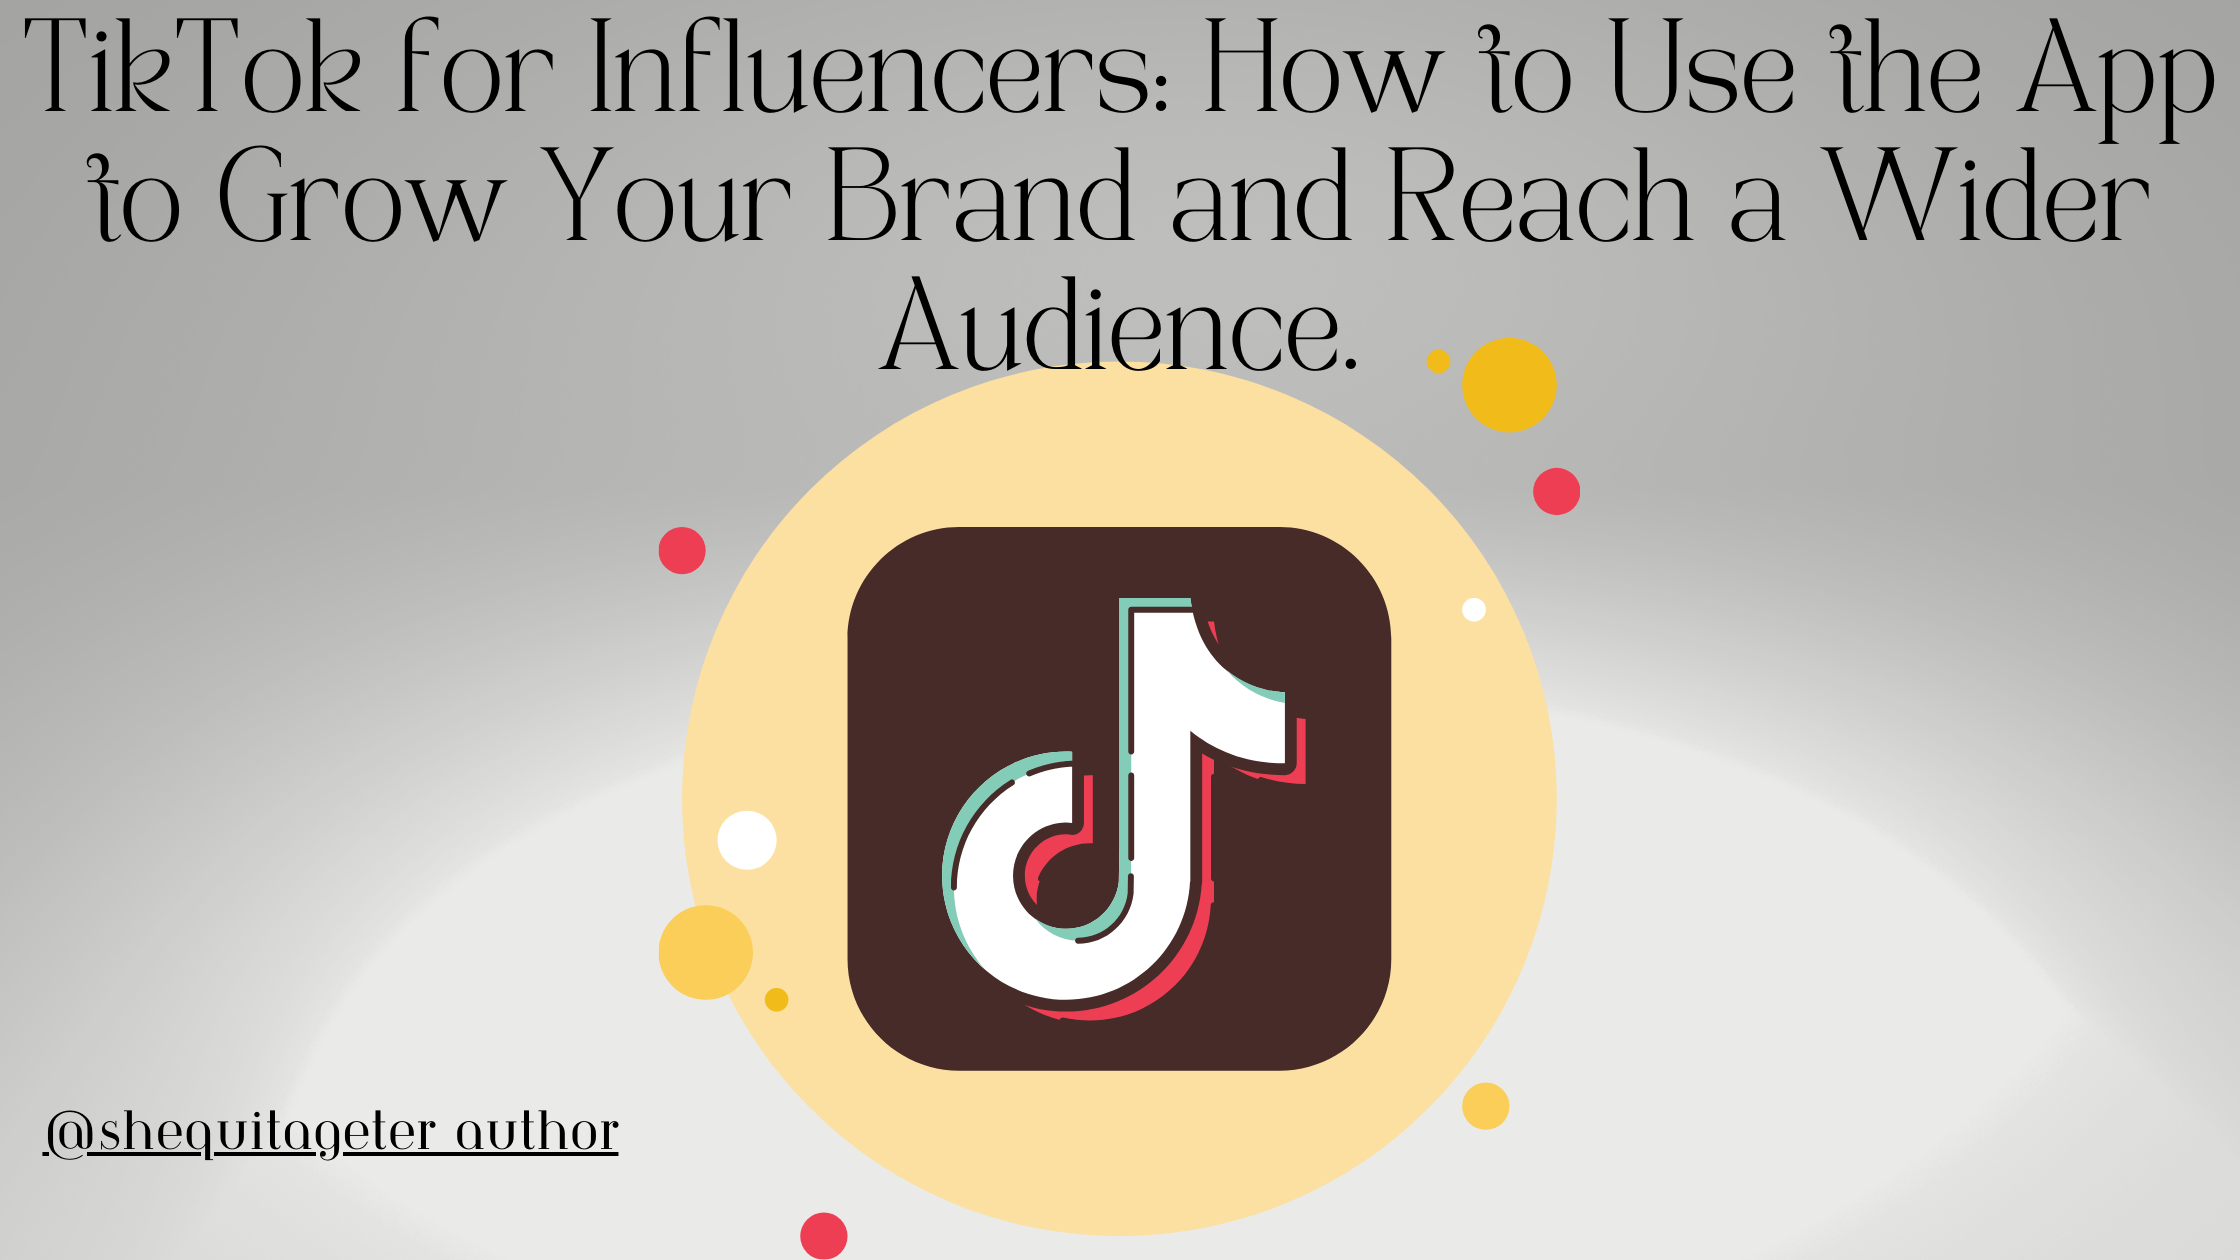 TikTok for Influencers: How to Use the App to Grow Your Brand and Reach a Wider Audience.